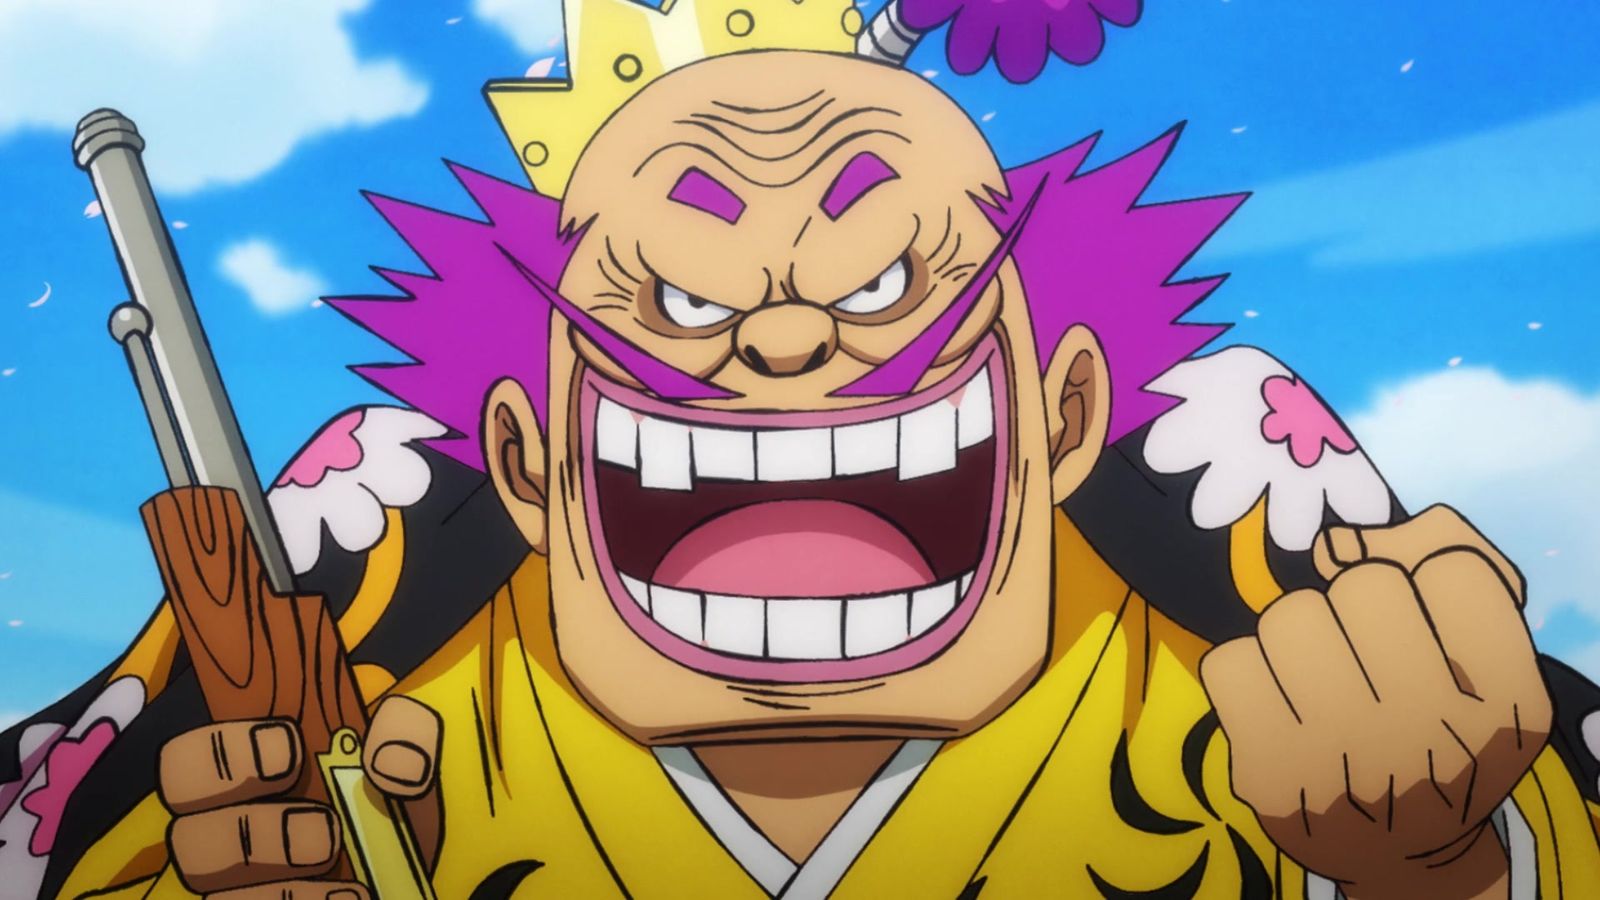 Orochi in the Wano arc of One Piece.